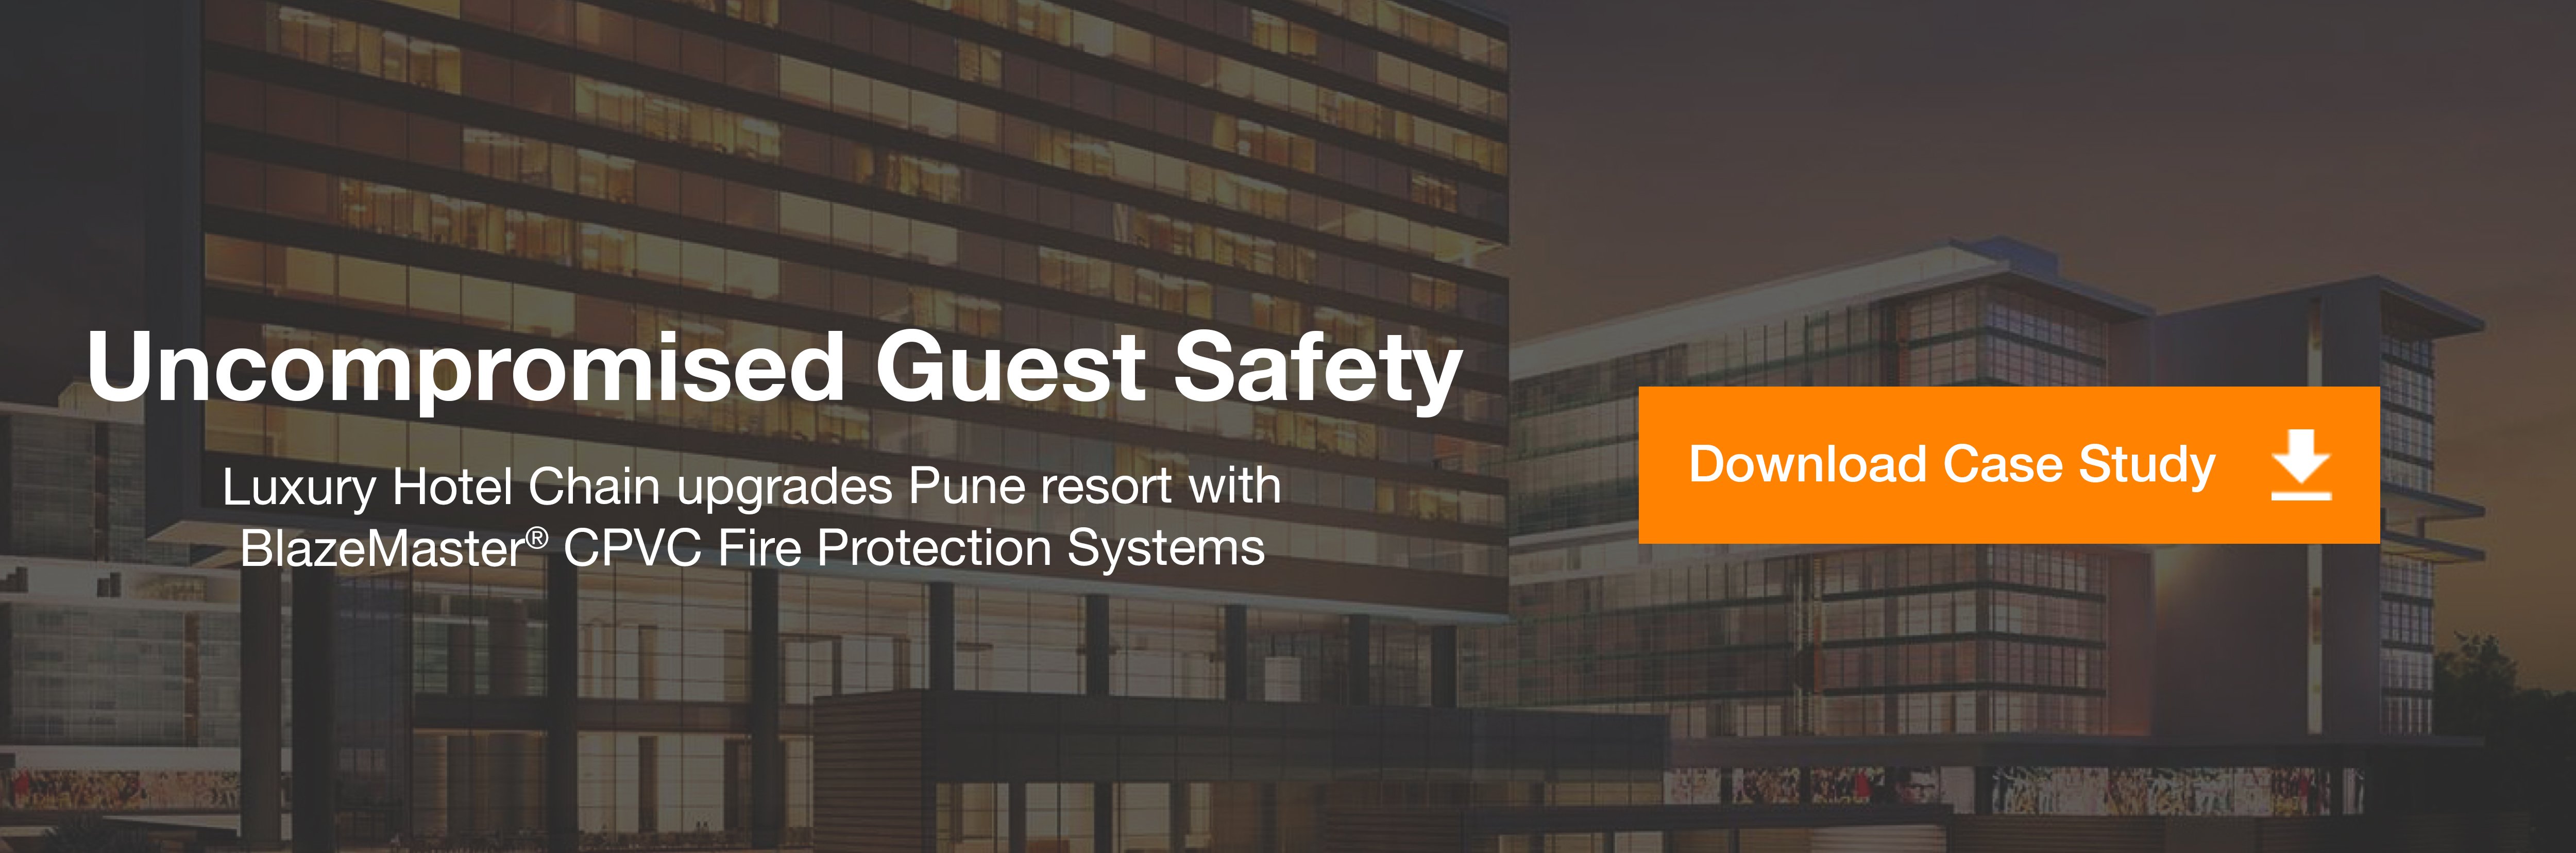 fire system in hotel case study download